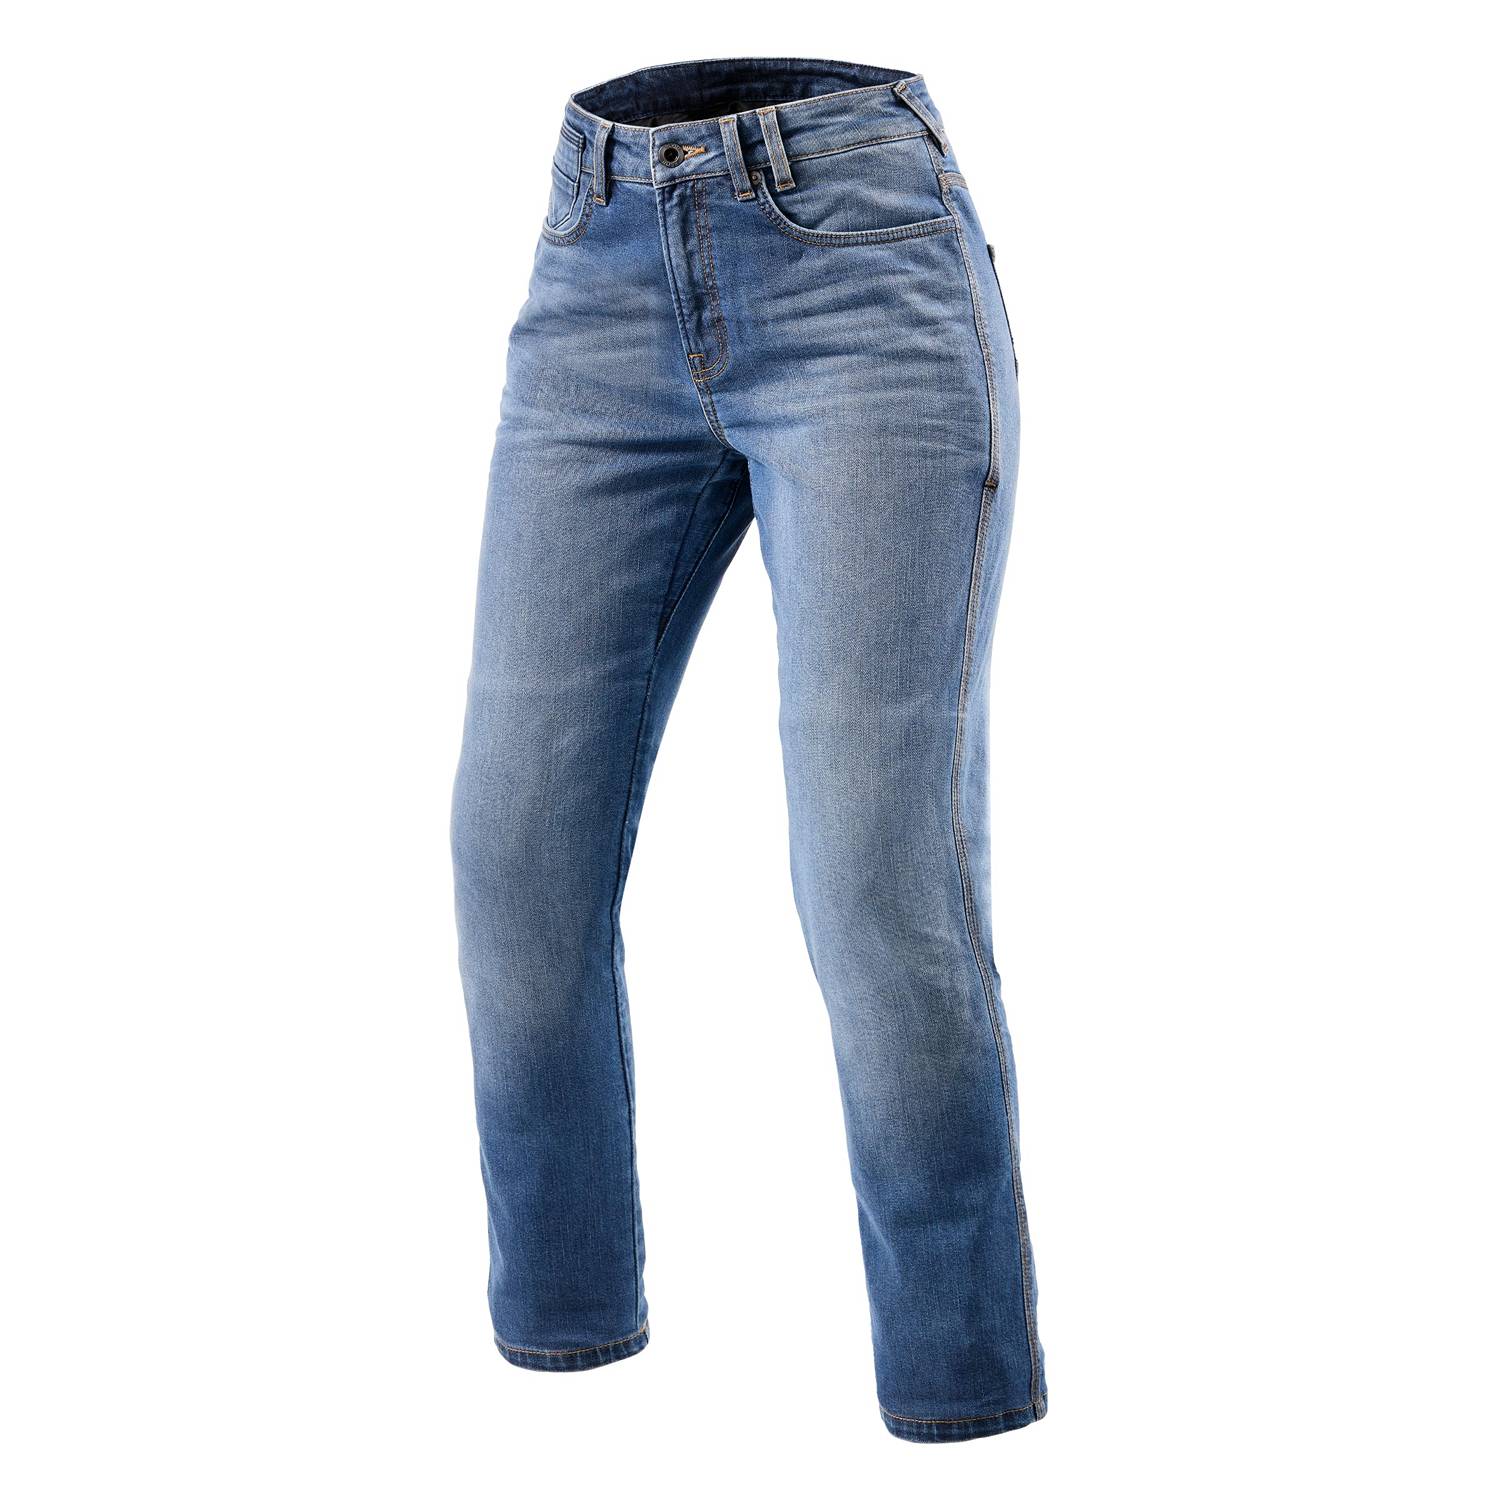 Image of REV'IT! Jeans Victoria 2 Ladies SF Classic Blue Used Motorcycle Jeans Größe L32/W28